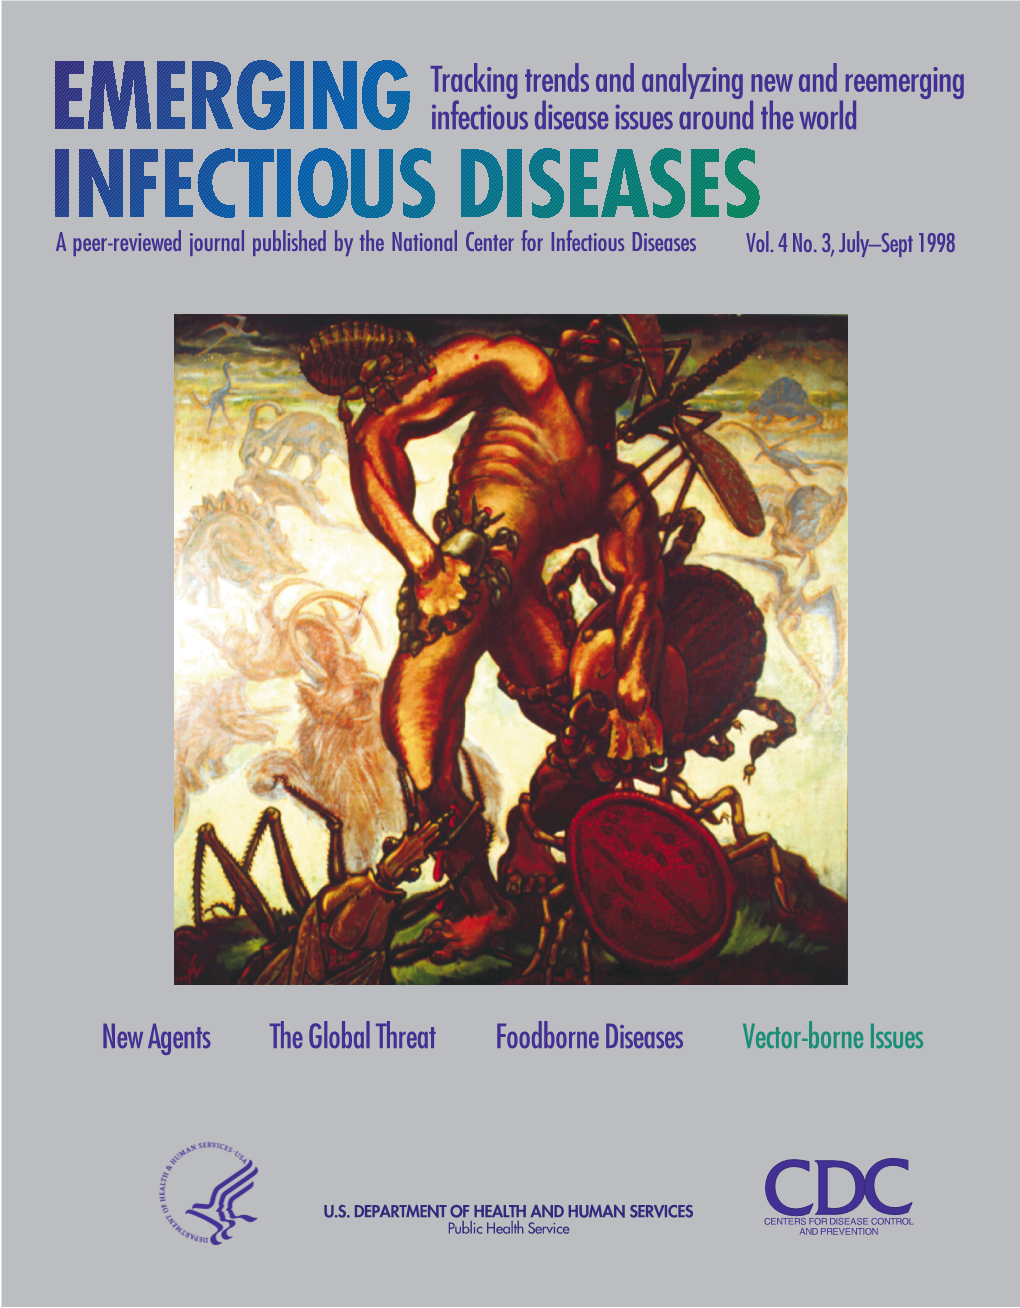 EMERGING INFECTIOUS DISEASES At